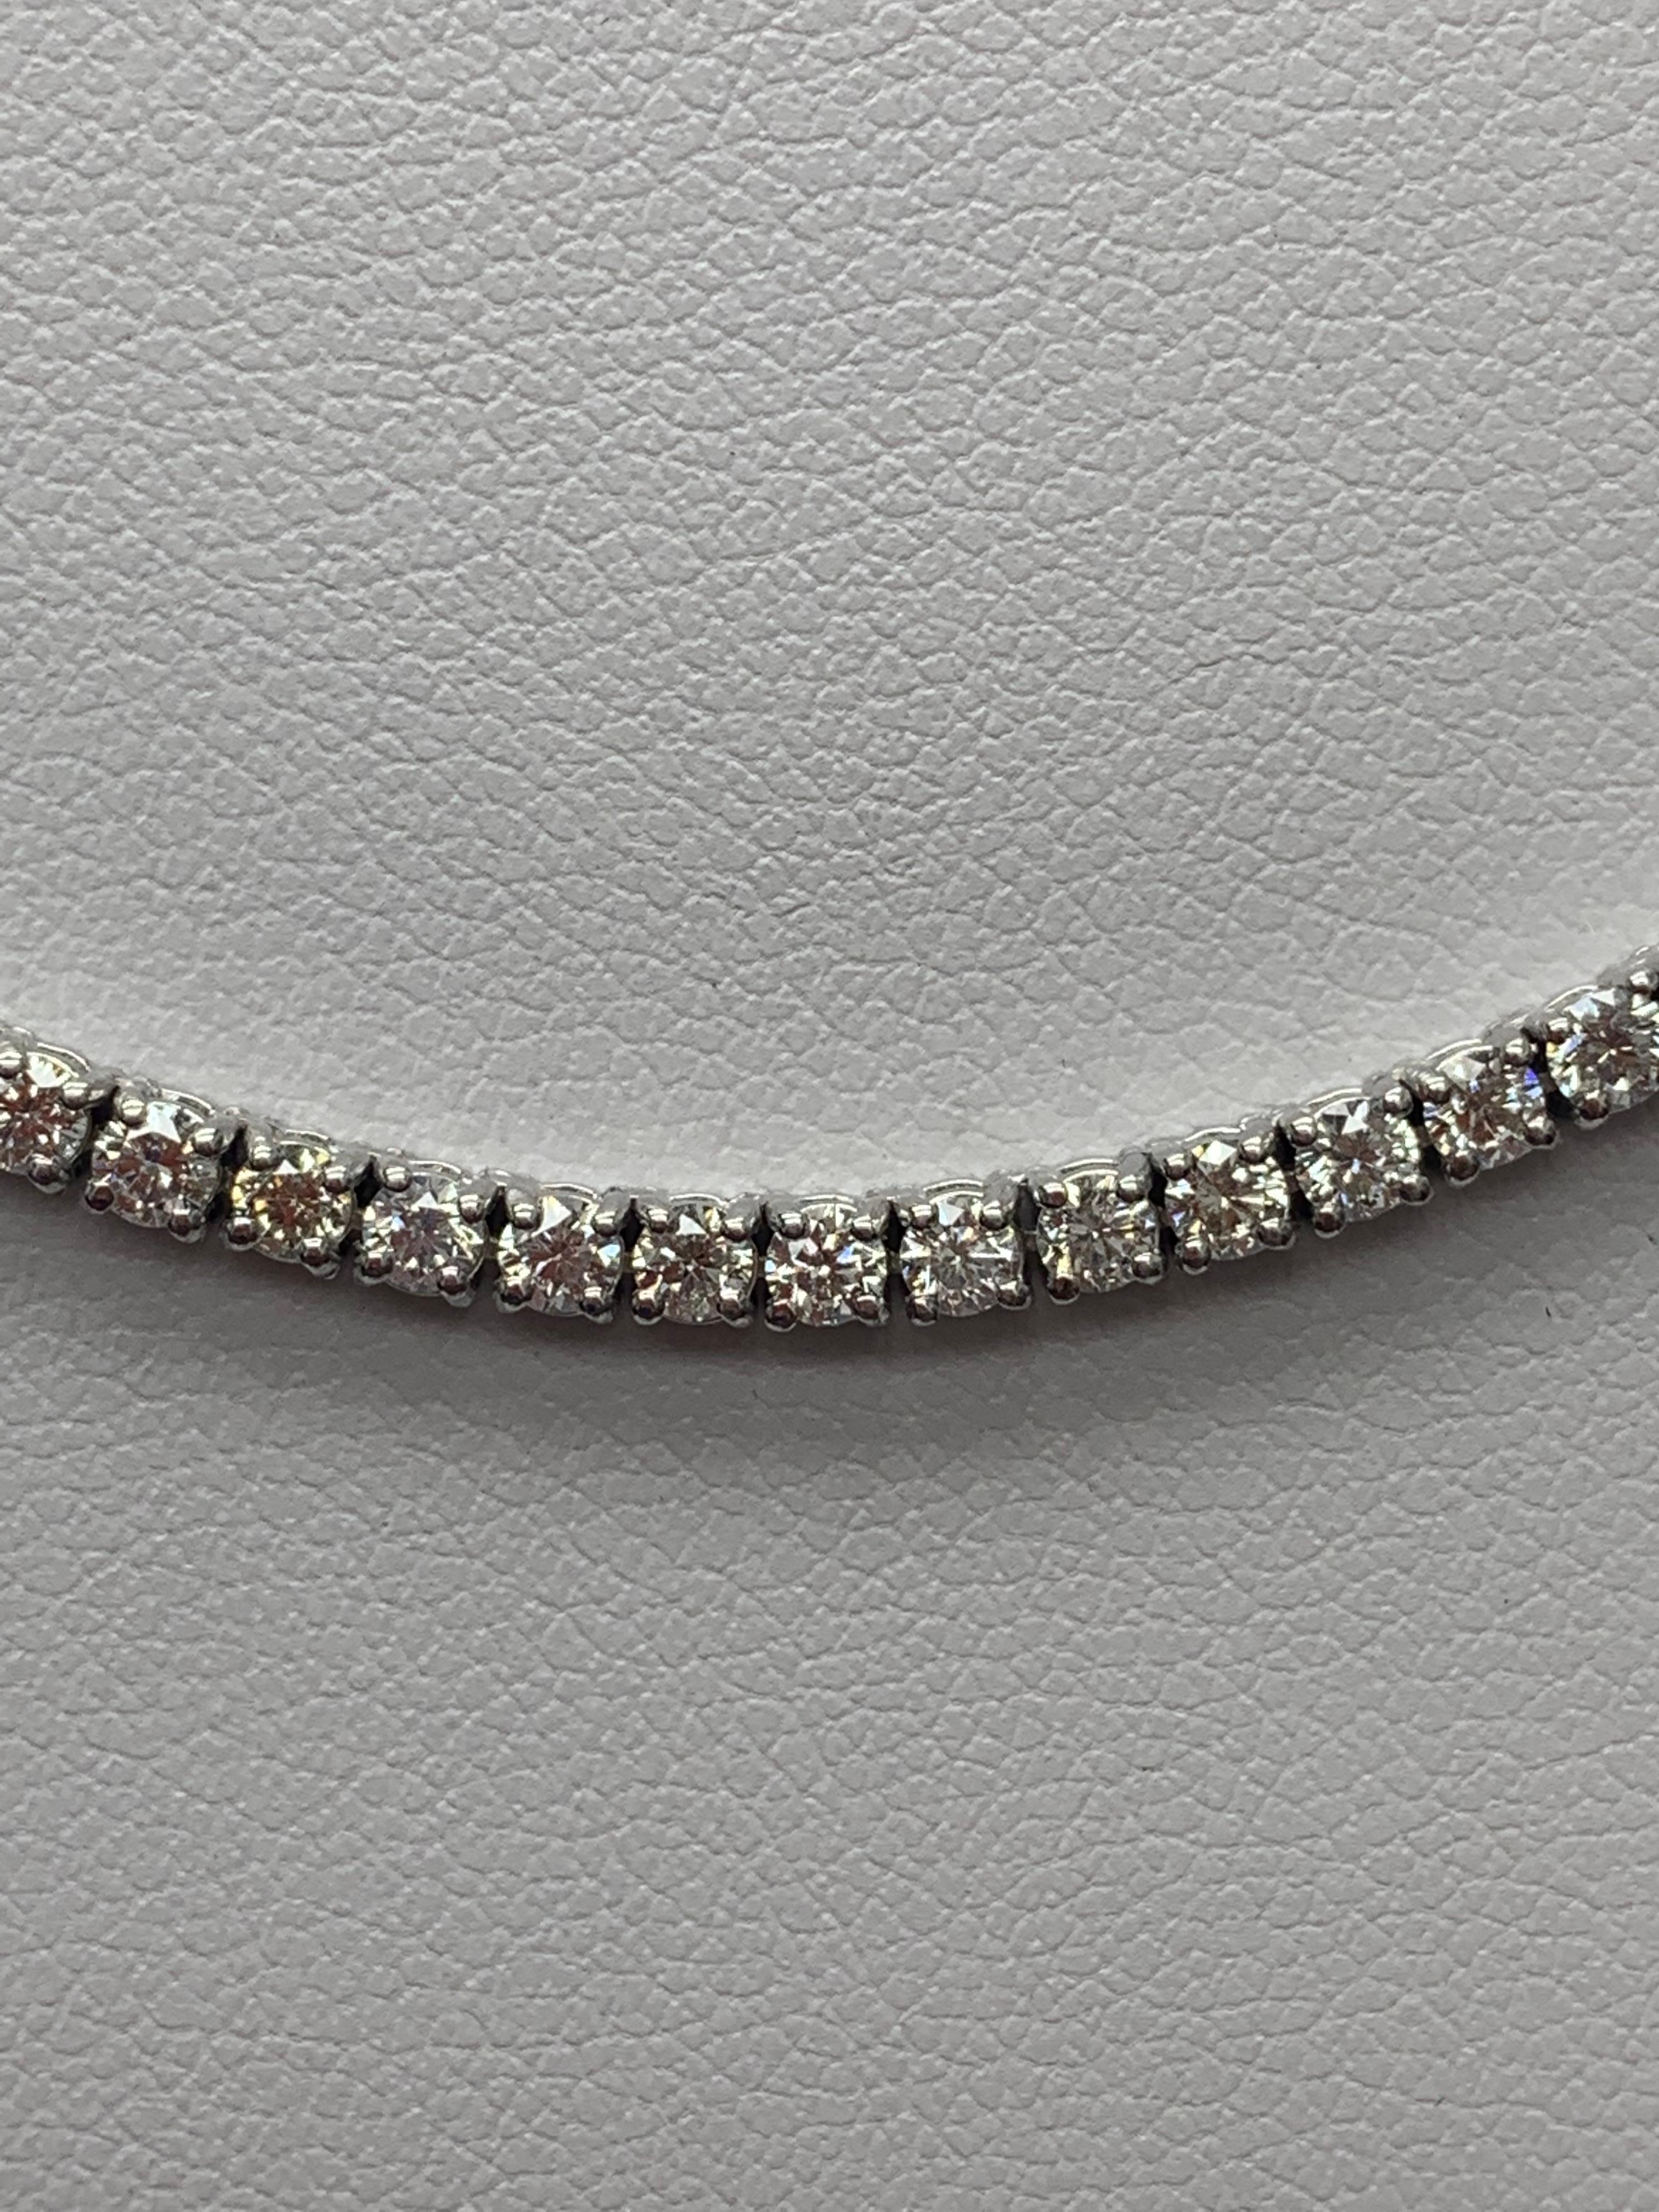 Women's 8.01 Carat Diamond Tennis Necklace in 14K White Gold For Sale